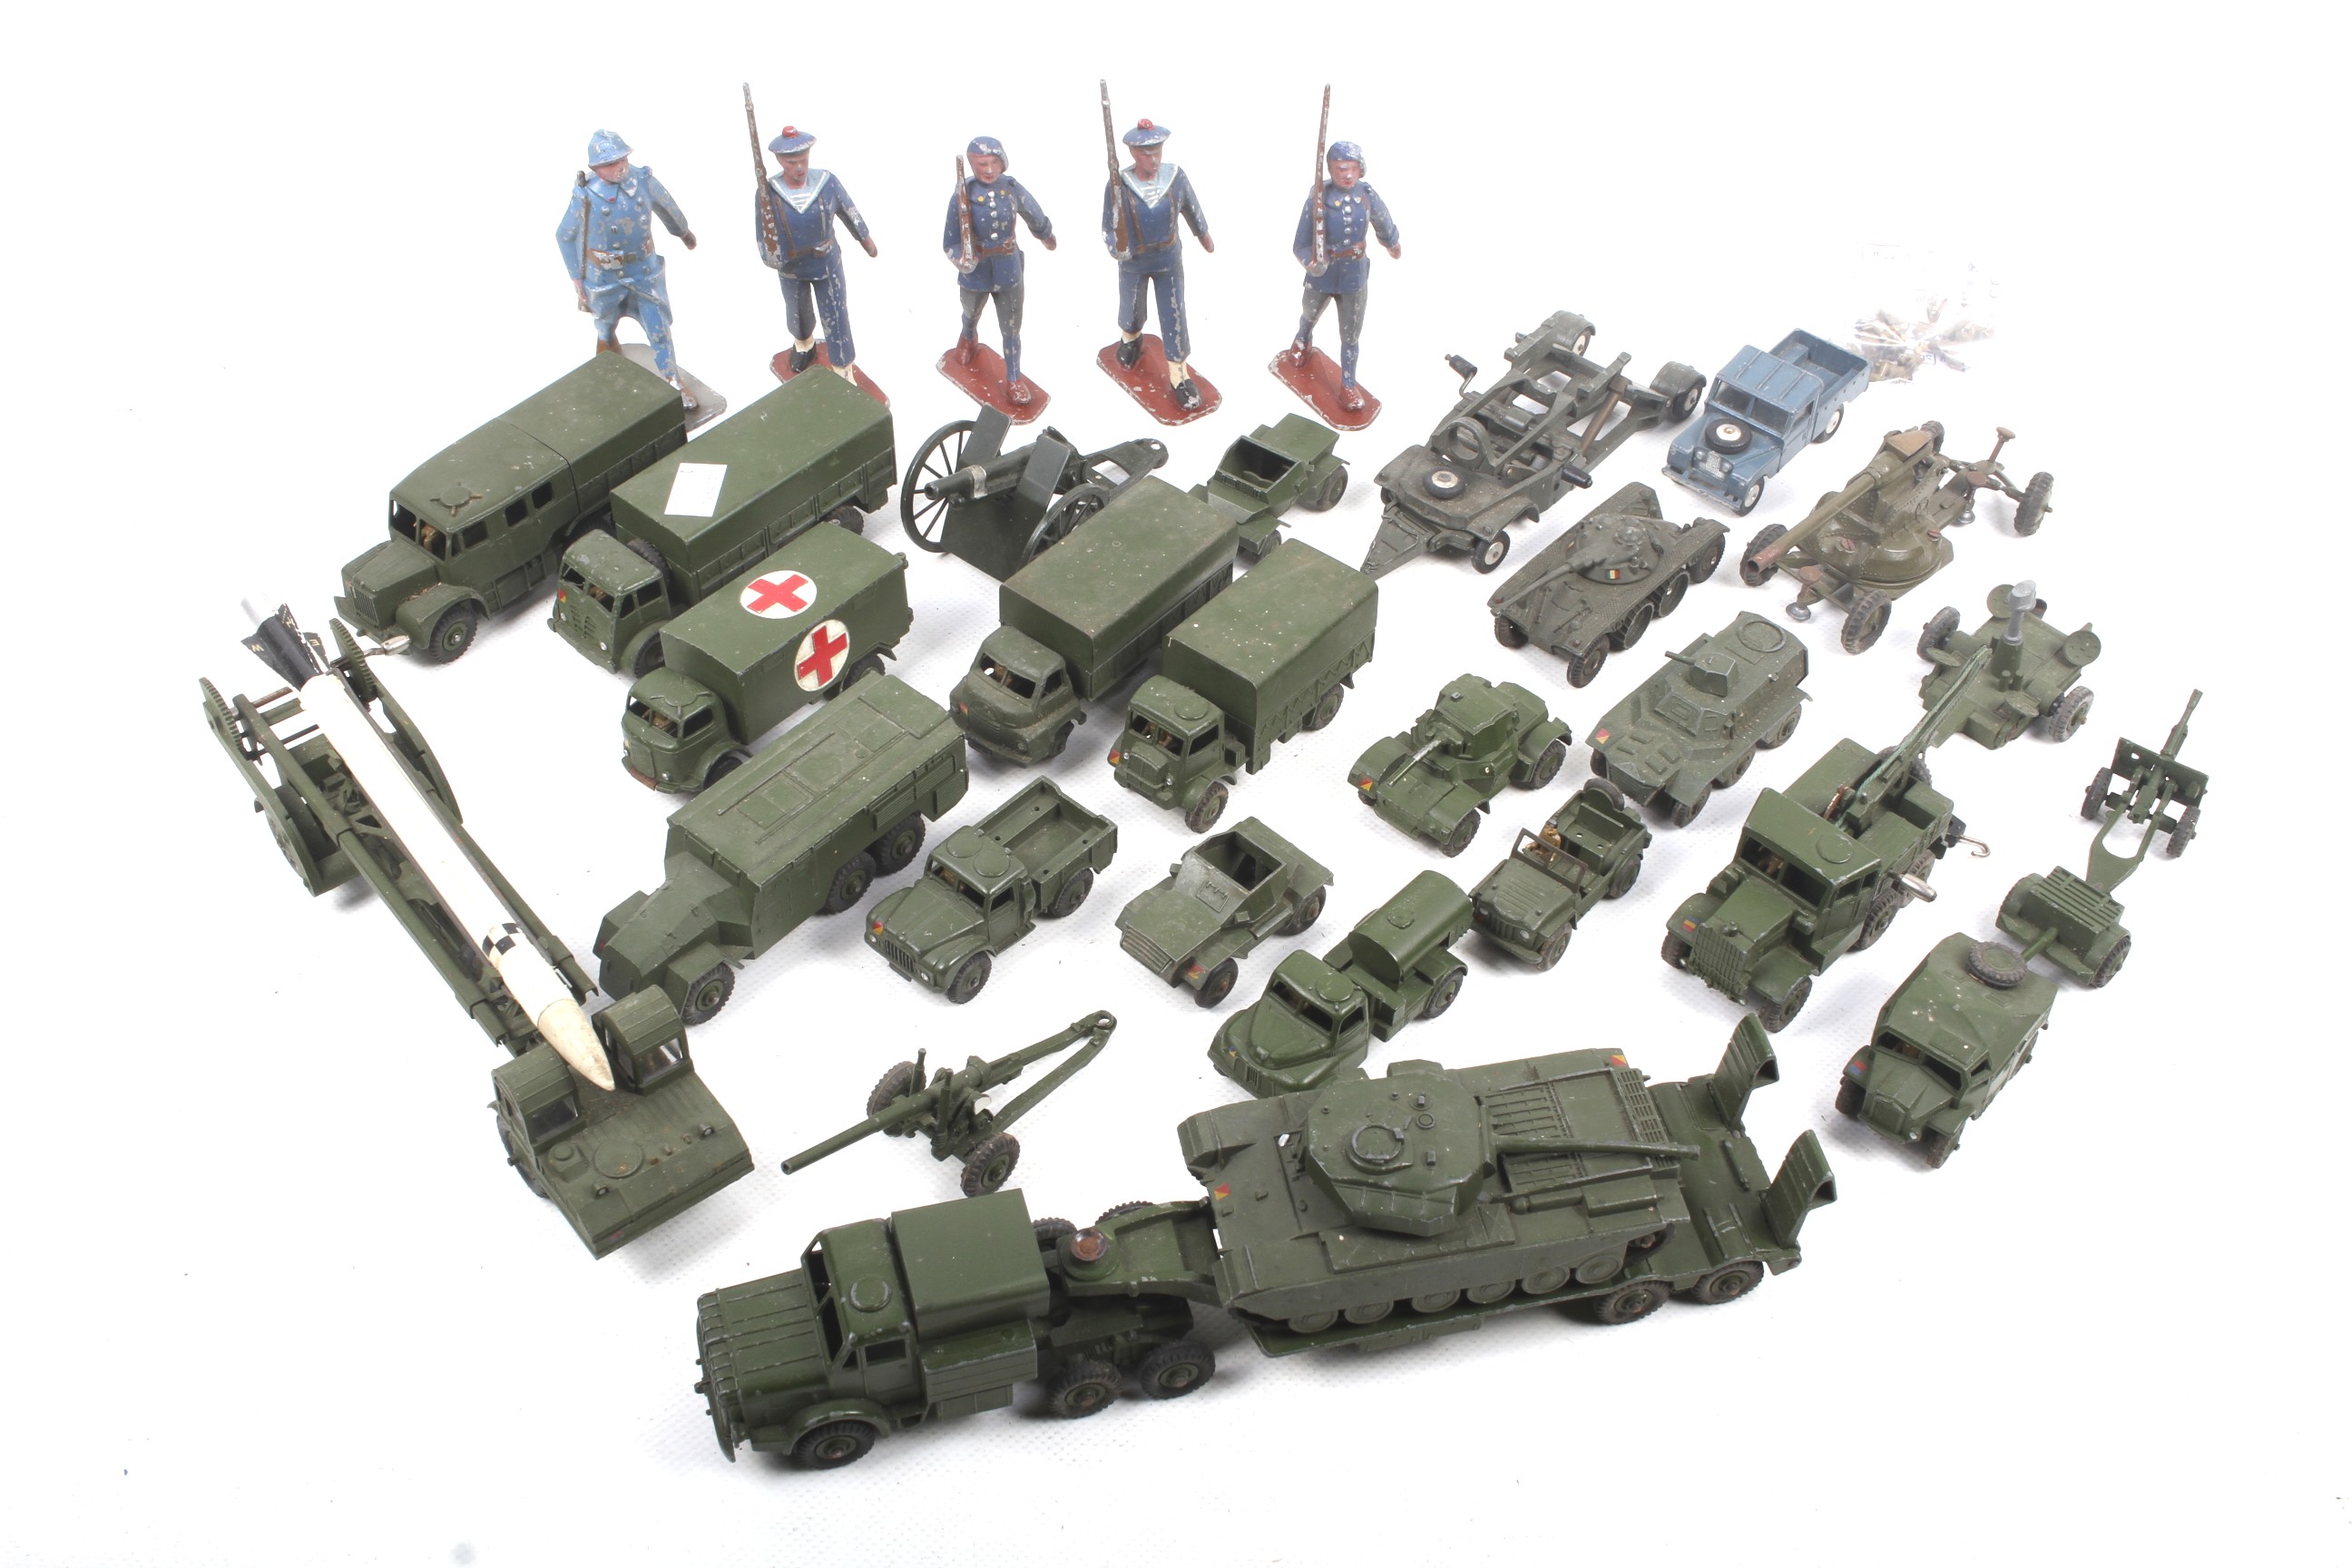 A collection of diecast metal military vehicles and accessories.